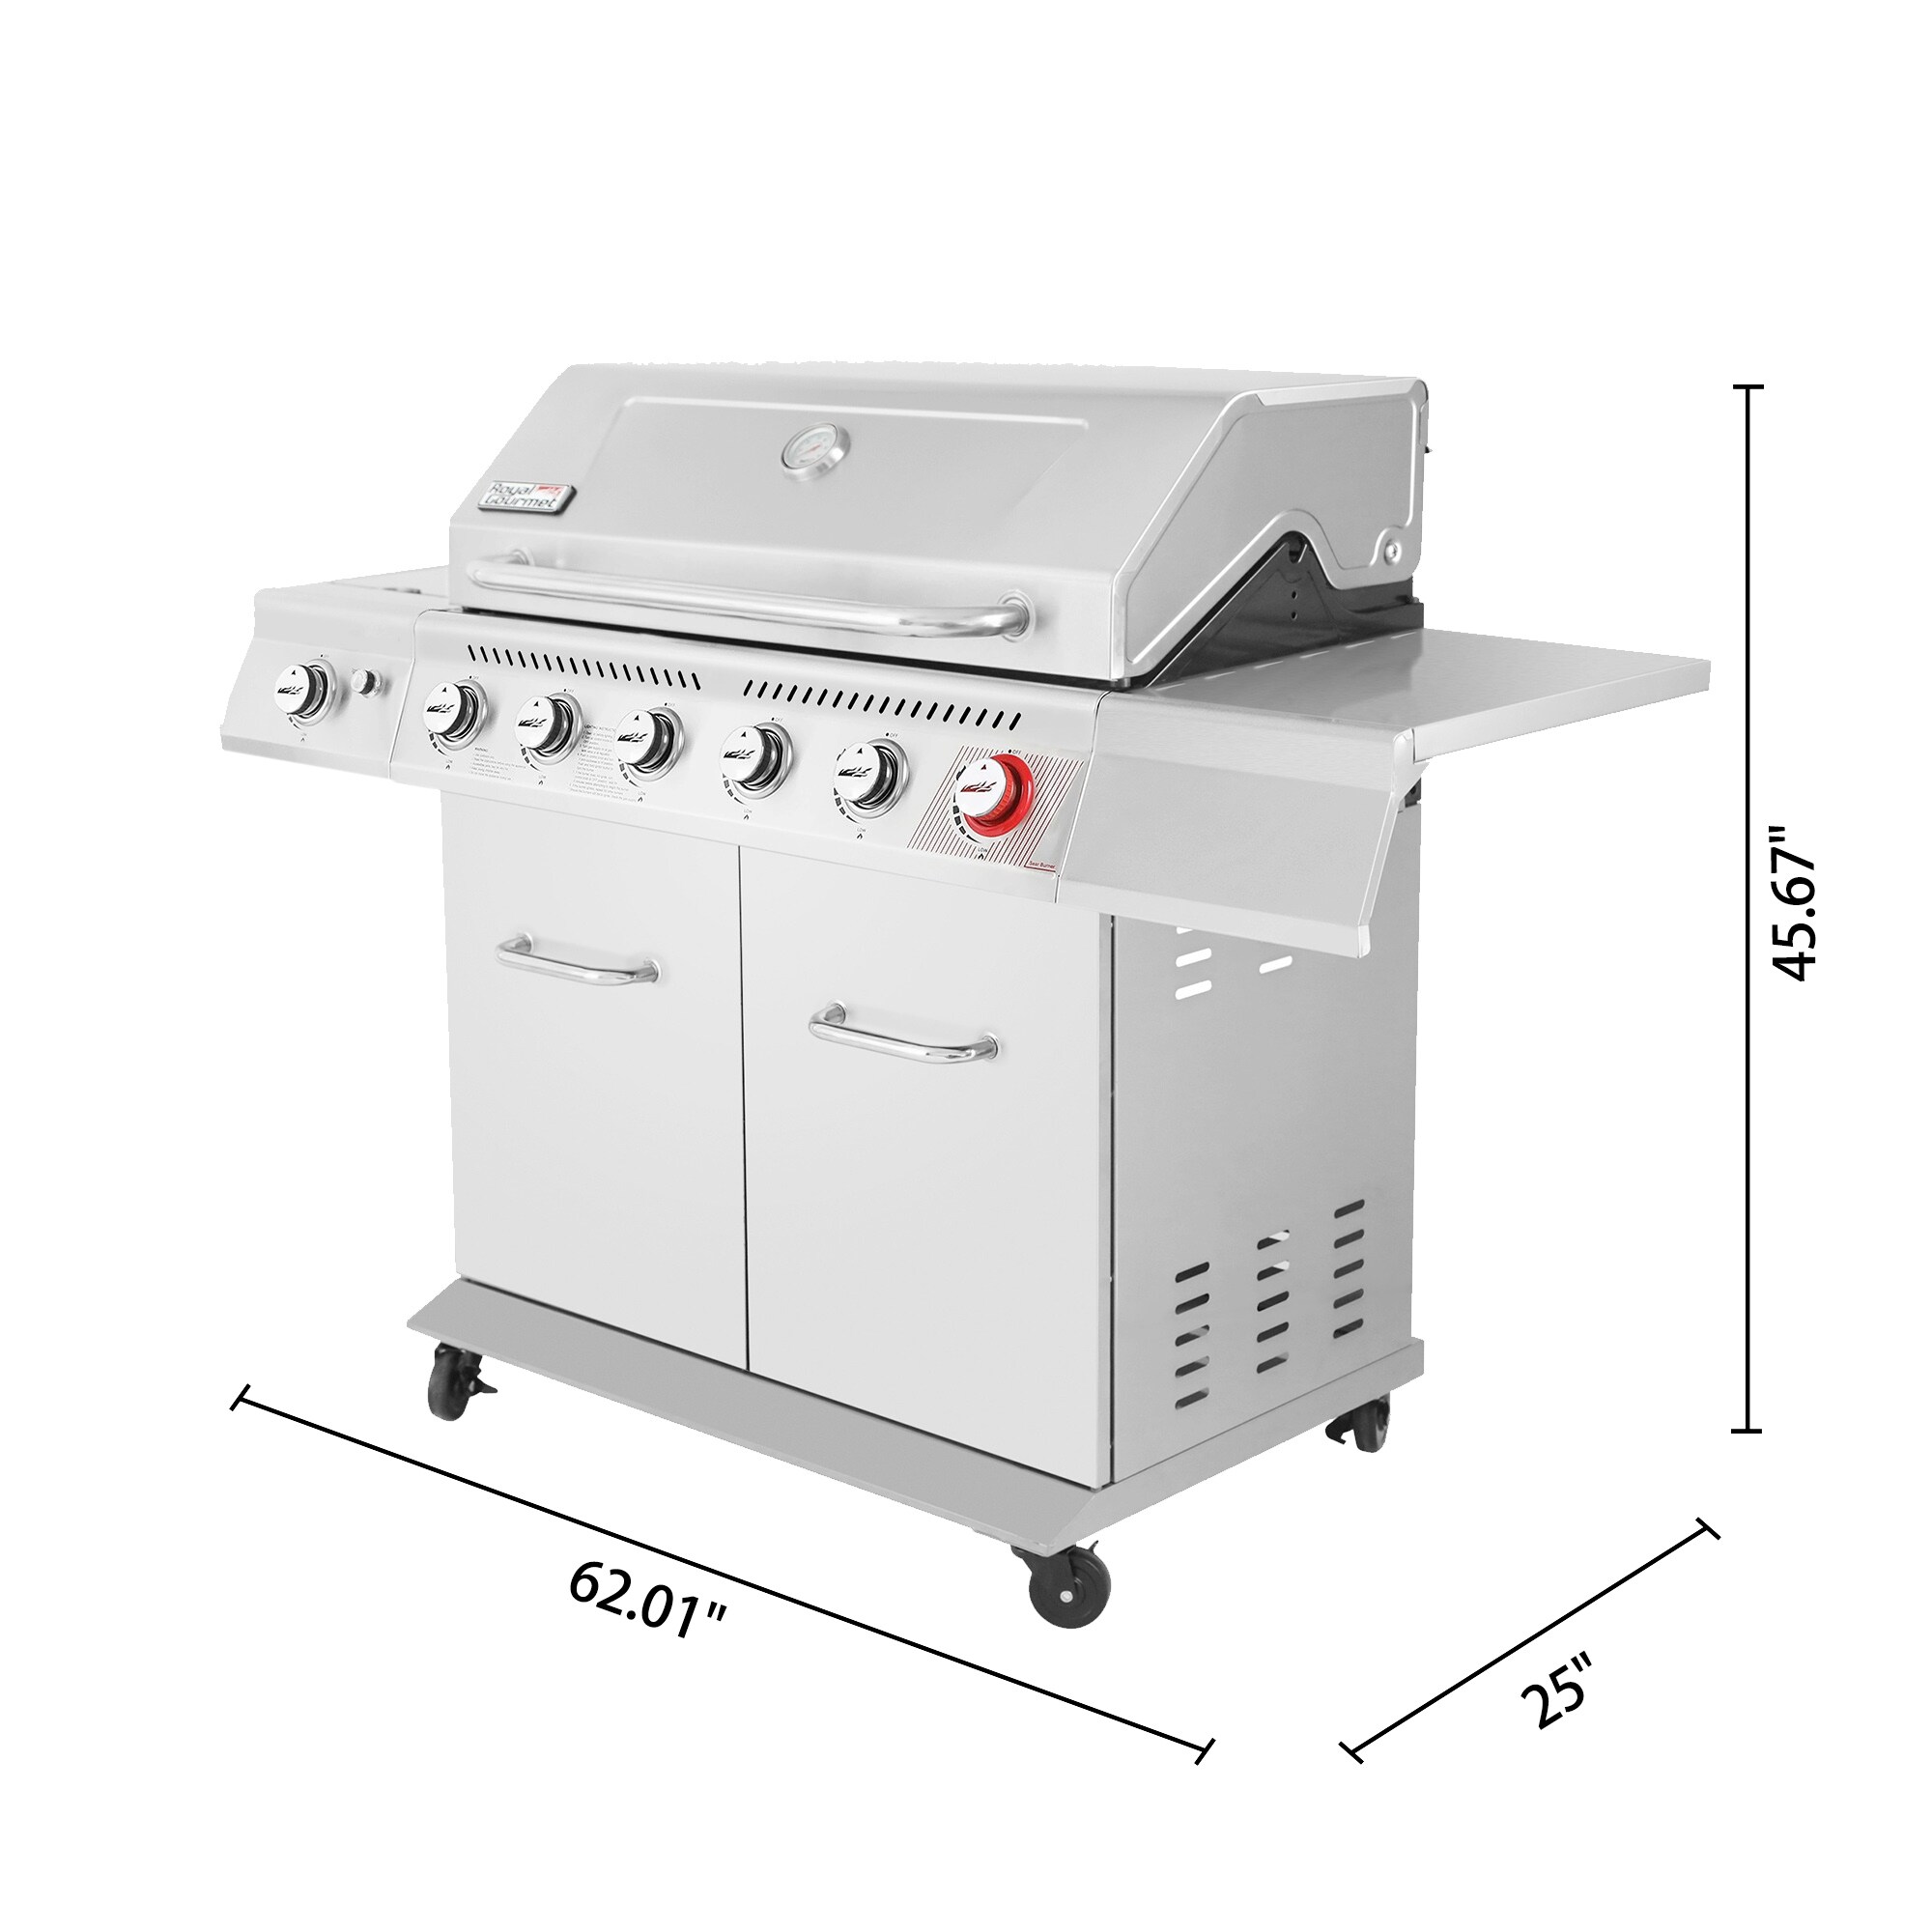 Steel Grill, Beyond Sear Burner, Gas 36898562 - Burner and - Bath Premier & On Sale Gourmet Silver Stainless Bed 6-Burner with BBQ Grill - Royal Side